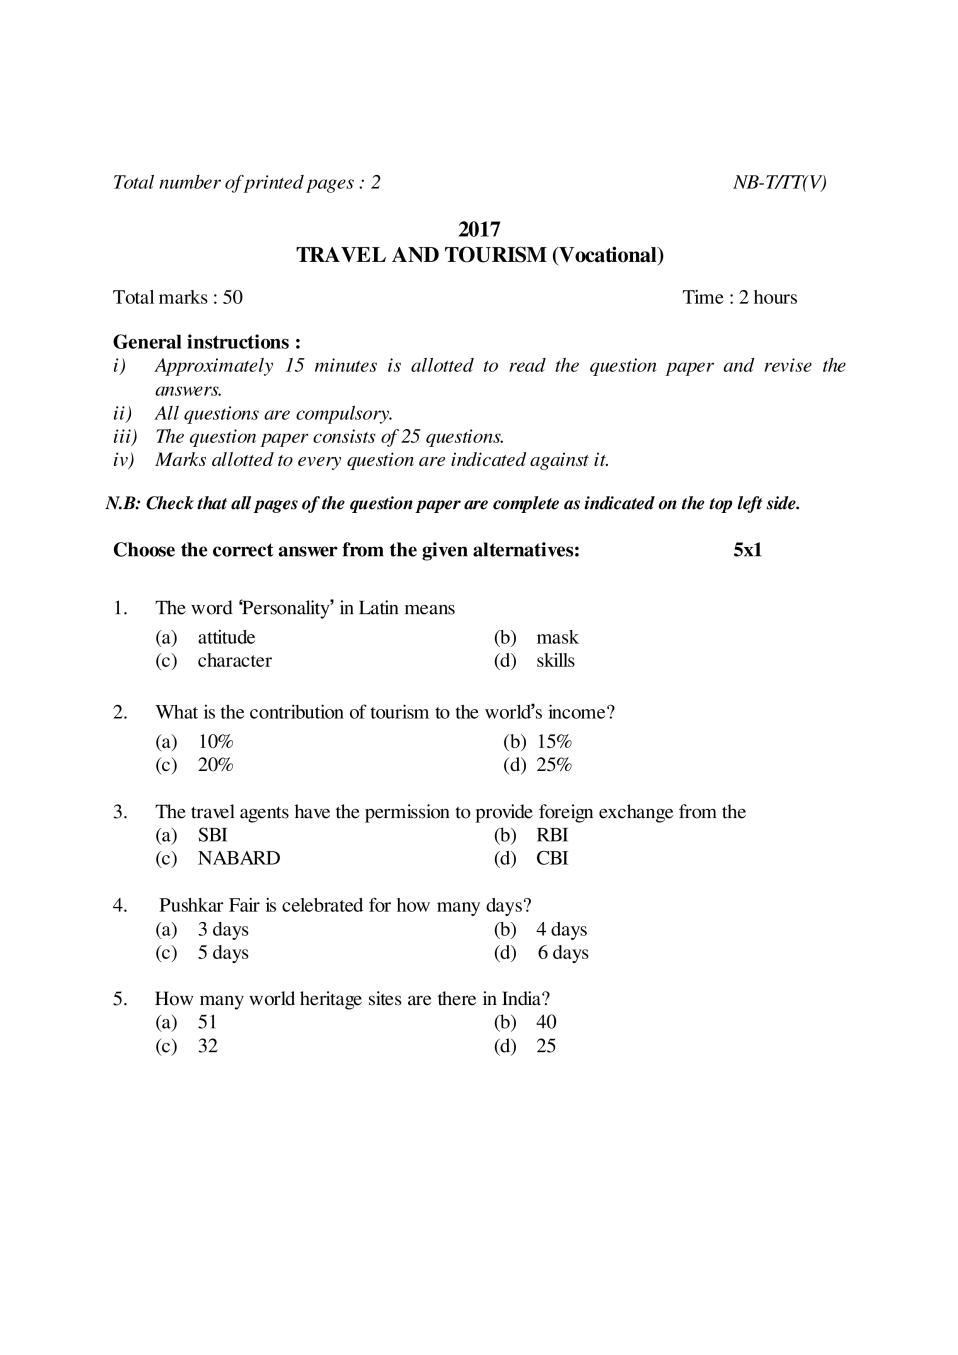 NBSE Class 10 Question Paper 2017 for Travel _ Tourism - Page 1